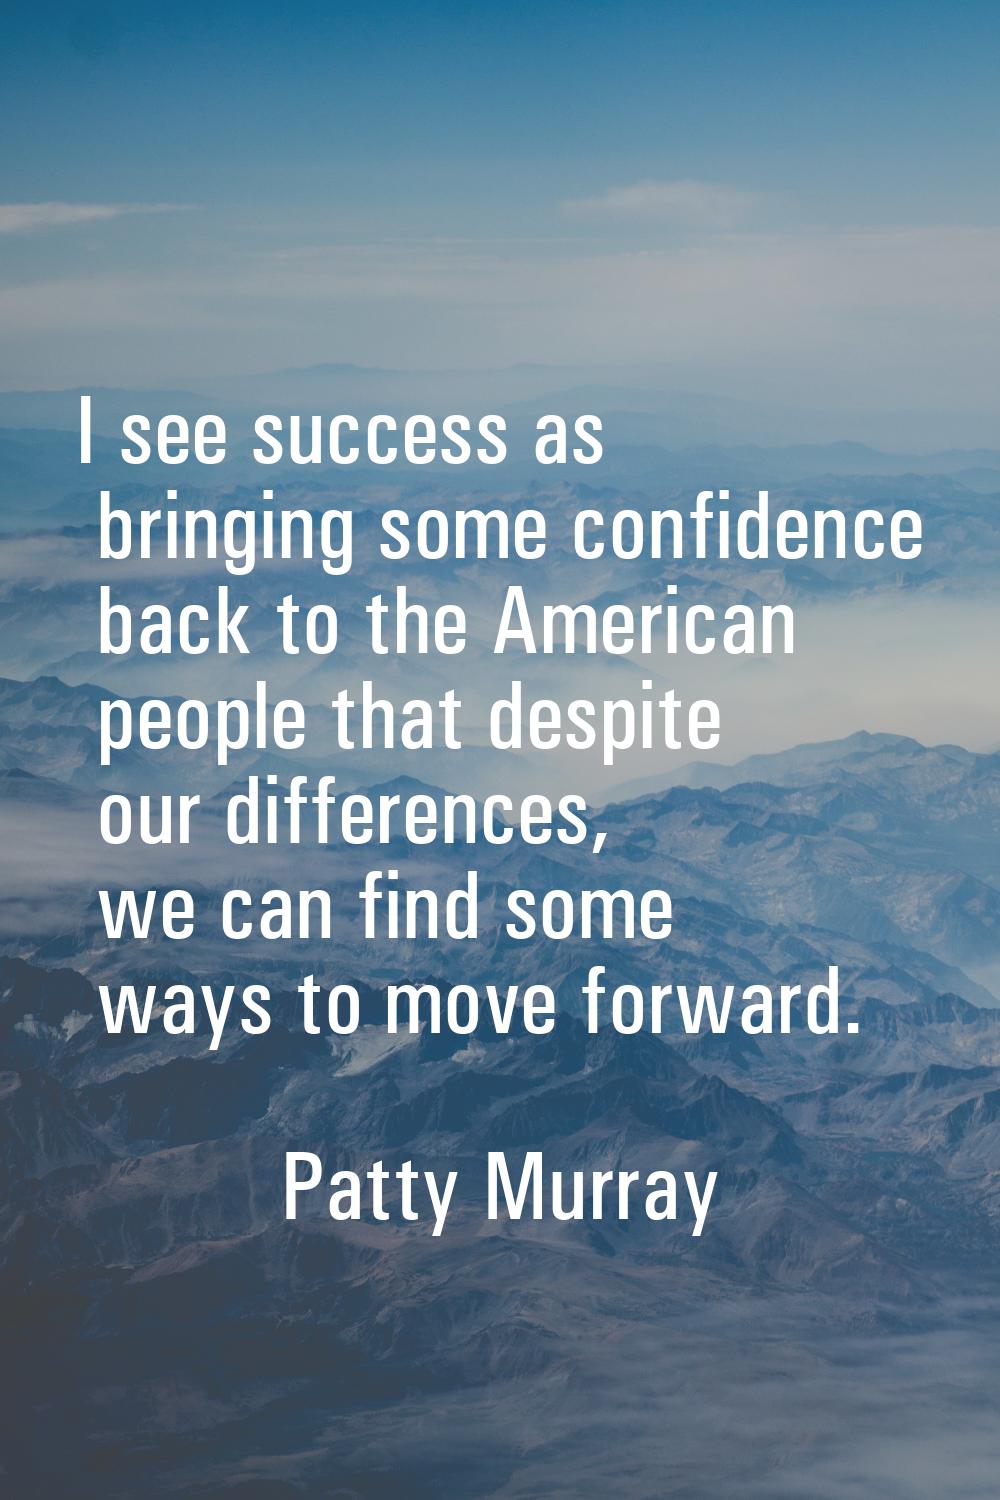 I see success as bringing some confidence back to the American people that despite our differences,